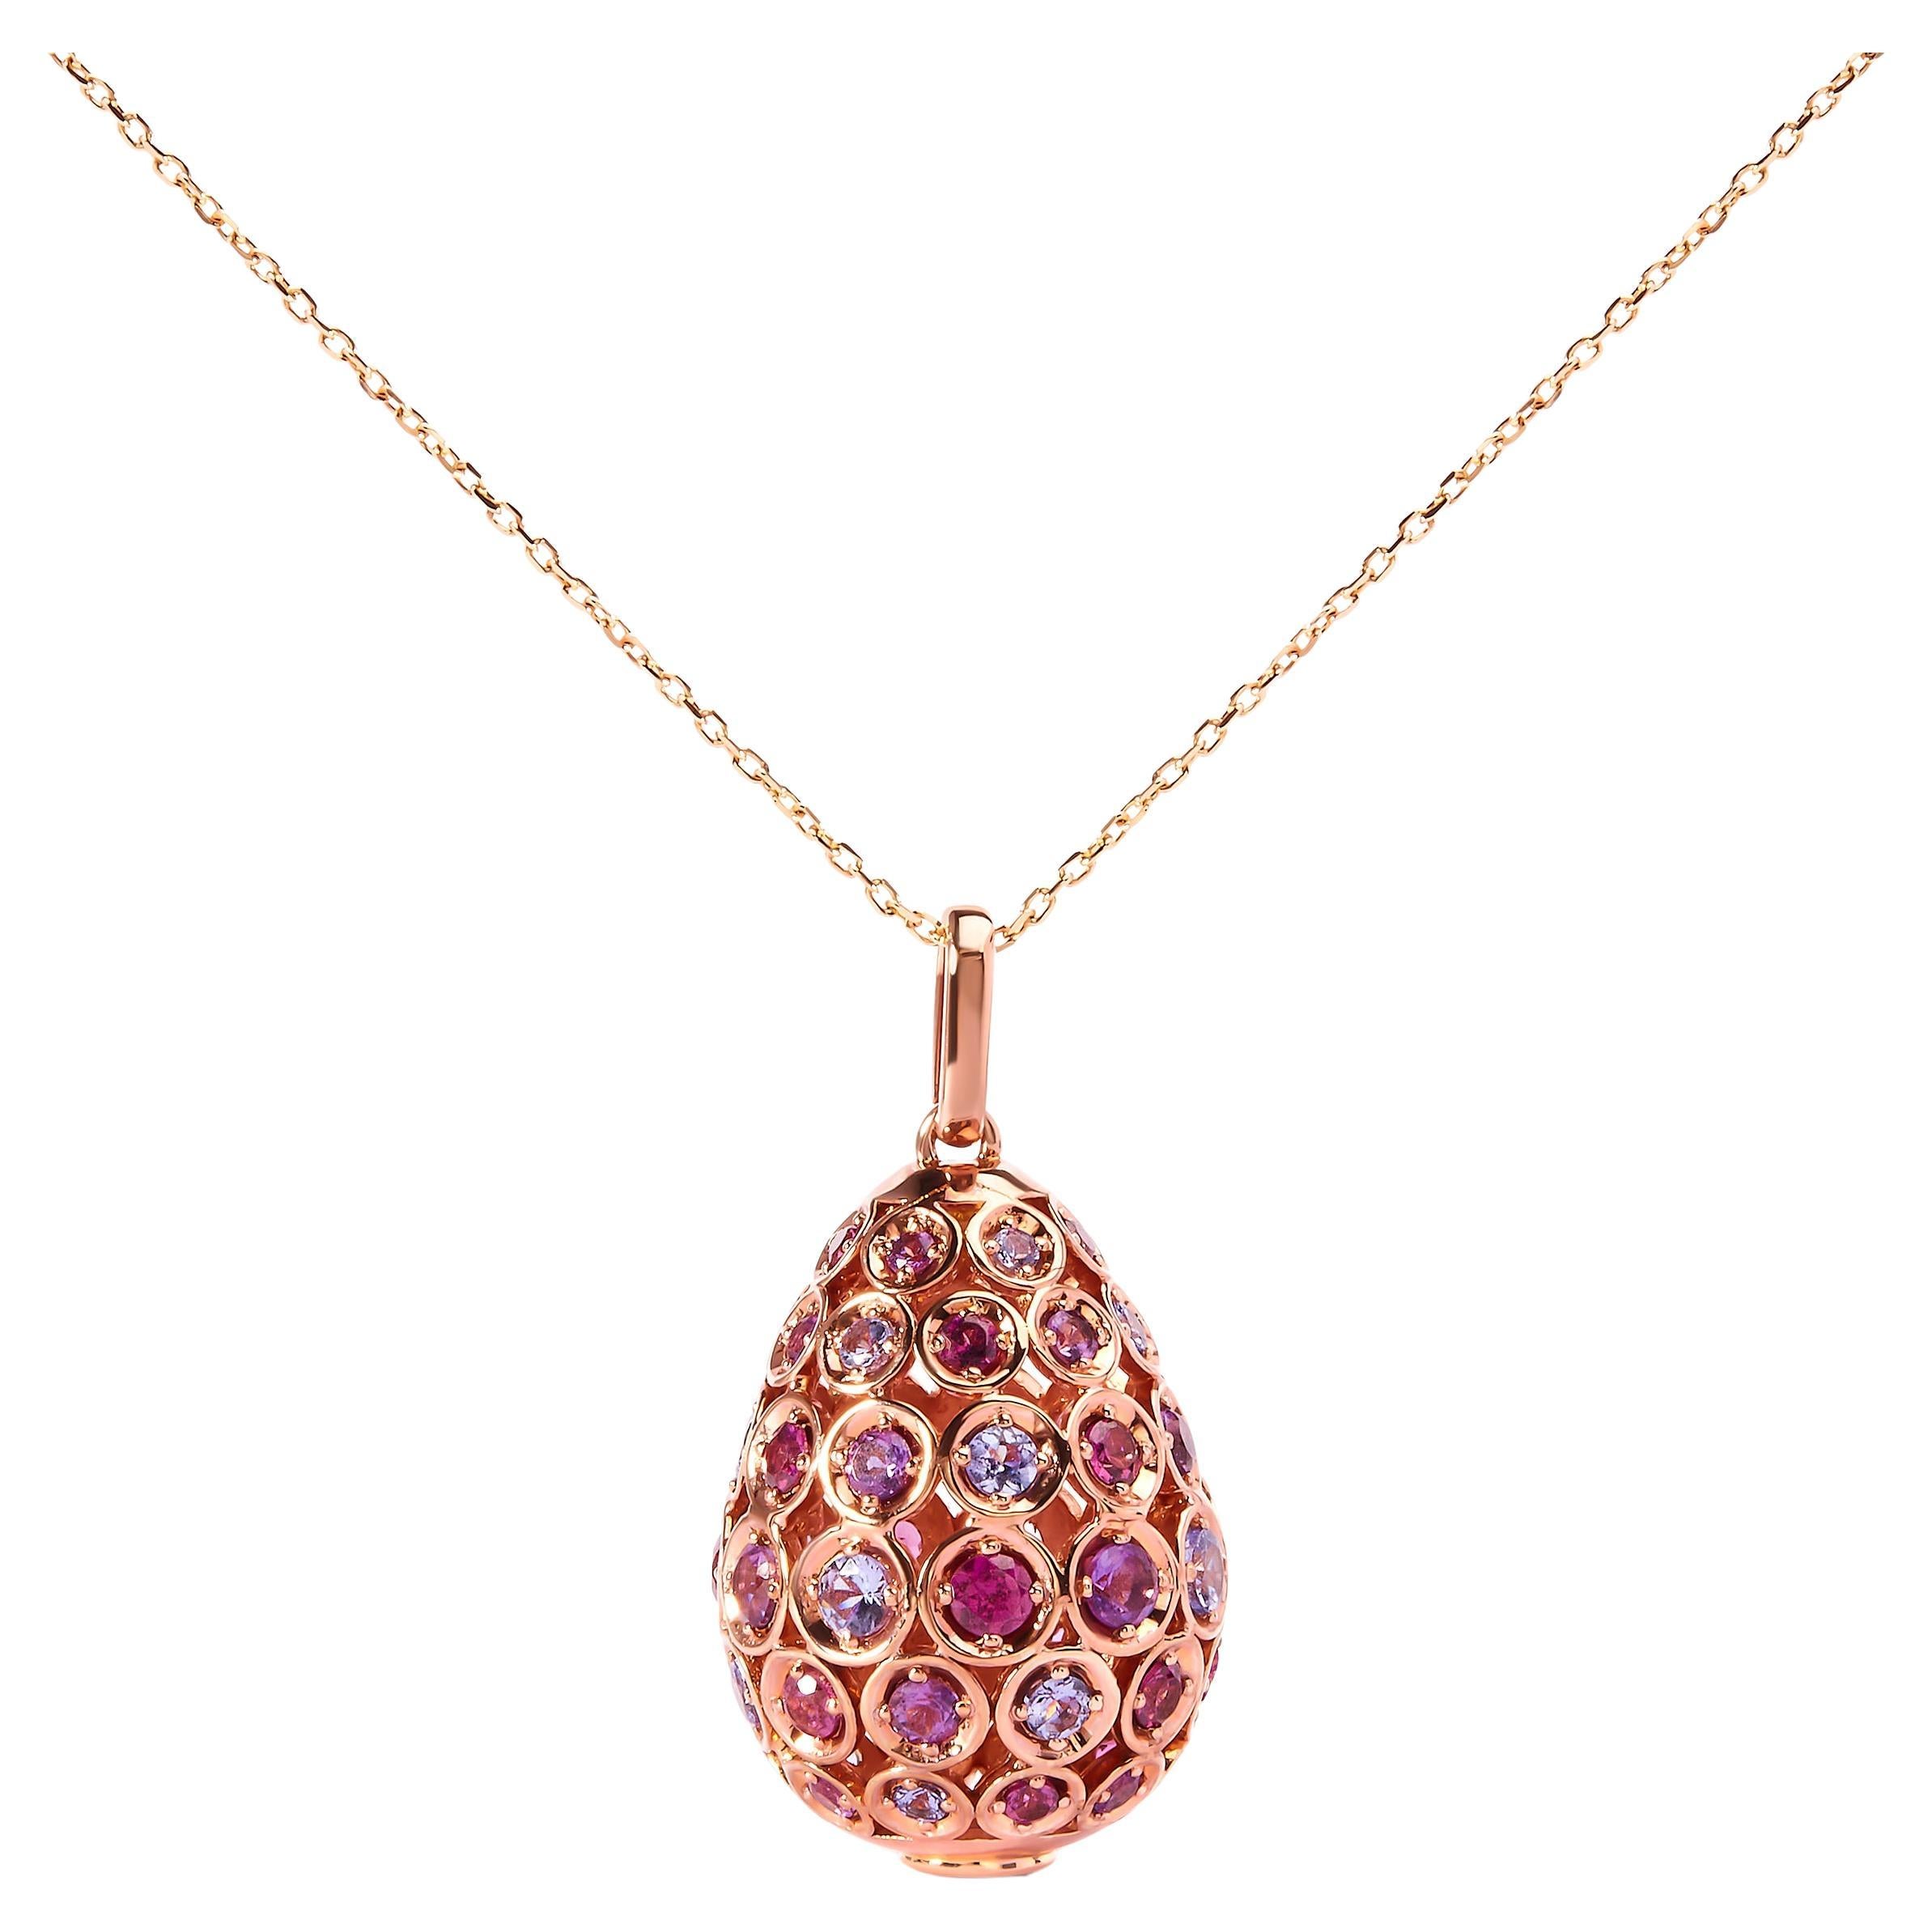 10K Rose Gold Plated Silver Rainbow Colored Gemstone Drop Pendant Necklace